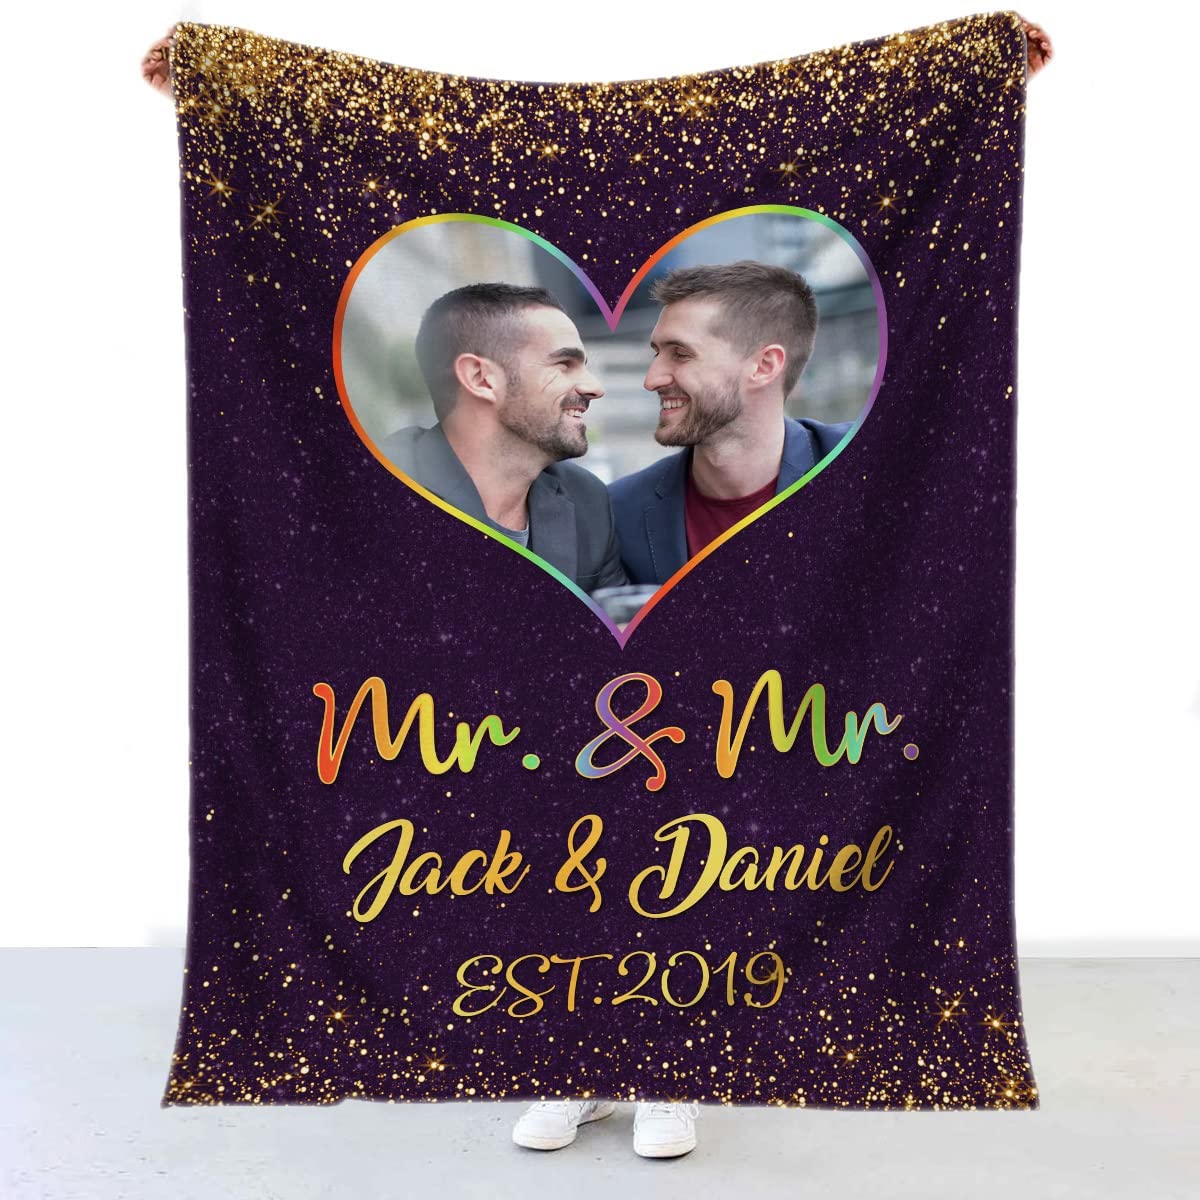 Personalized Blanket For Couple Gay Man/ Couple Lesbian Gift/ Fleece Blanket For Lgbtq